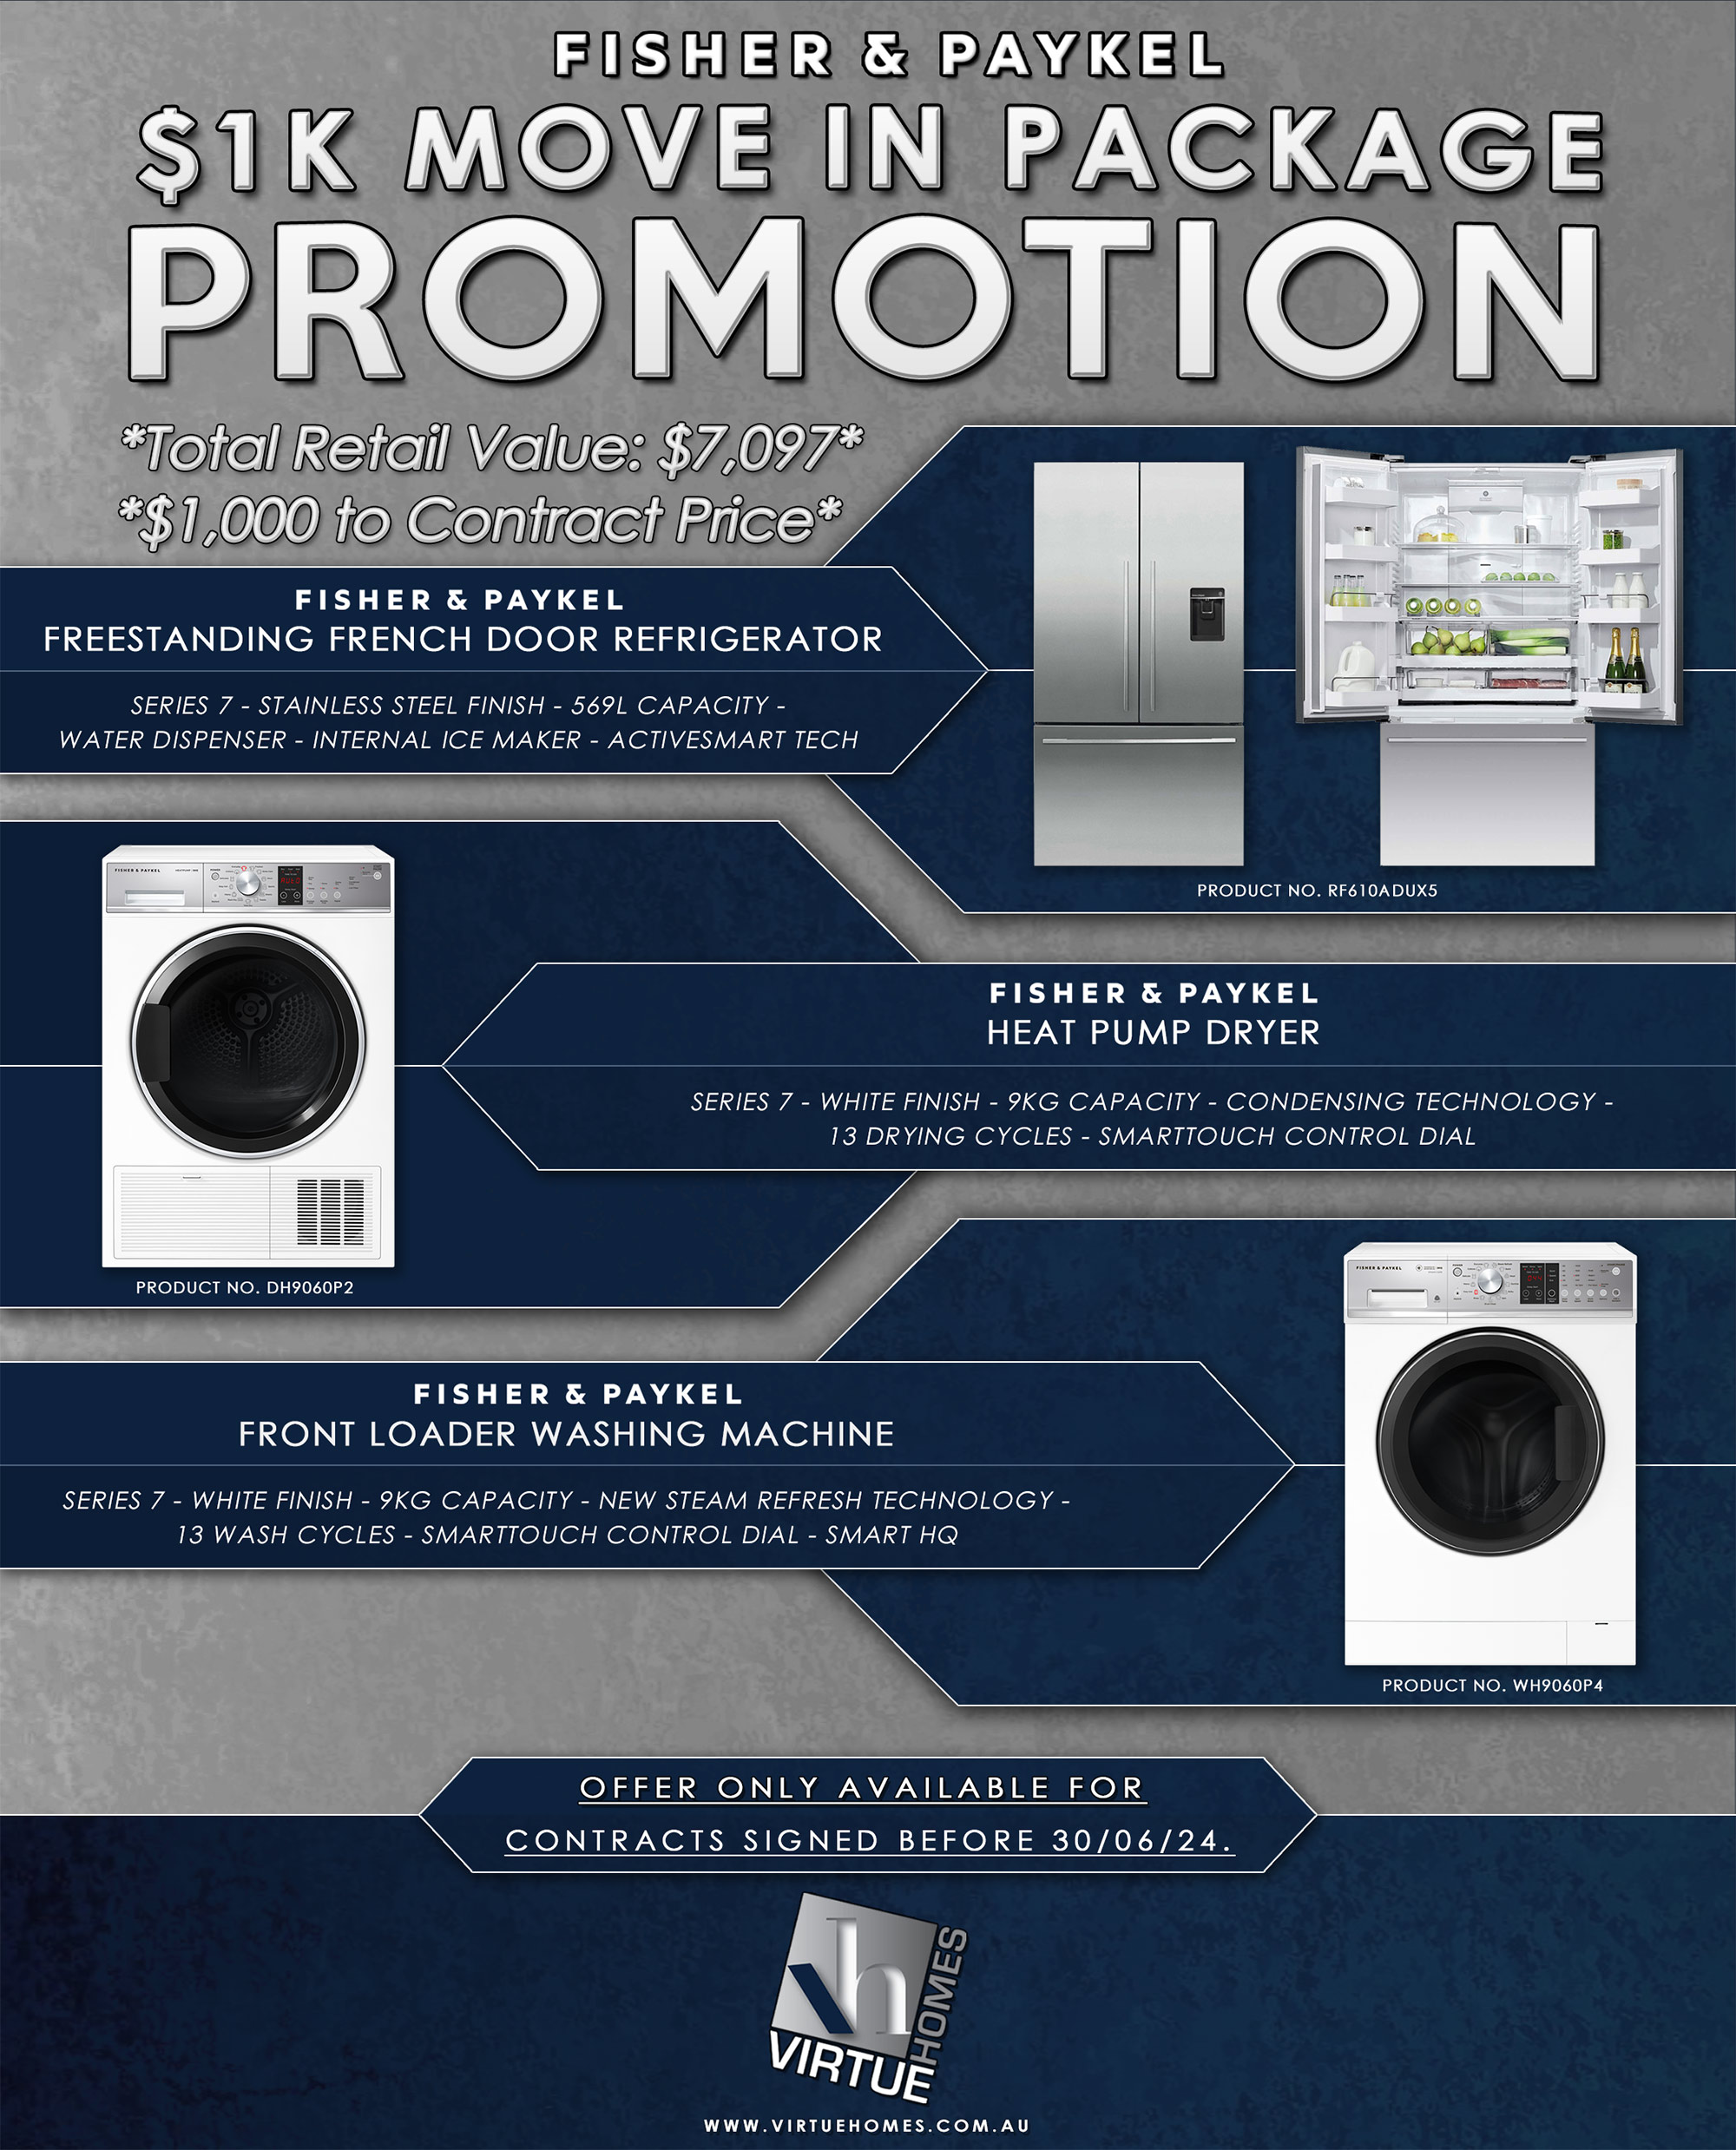 Graphic of an advert for Fisher & Paykel appliance package with a new home, showing dark blue and grey background, text and images of the fridge, washing machine and heat pump dryer